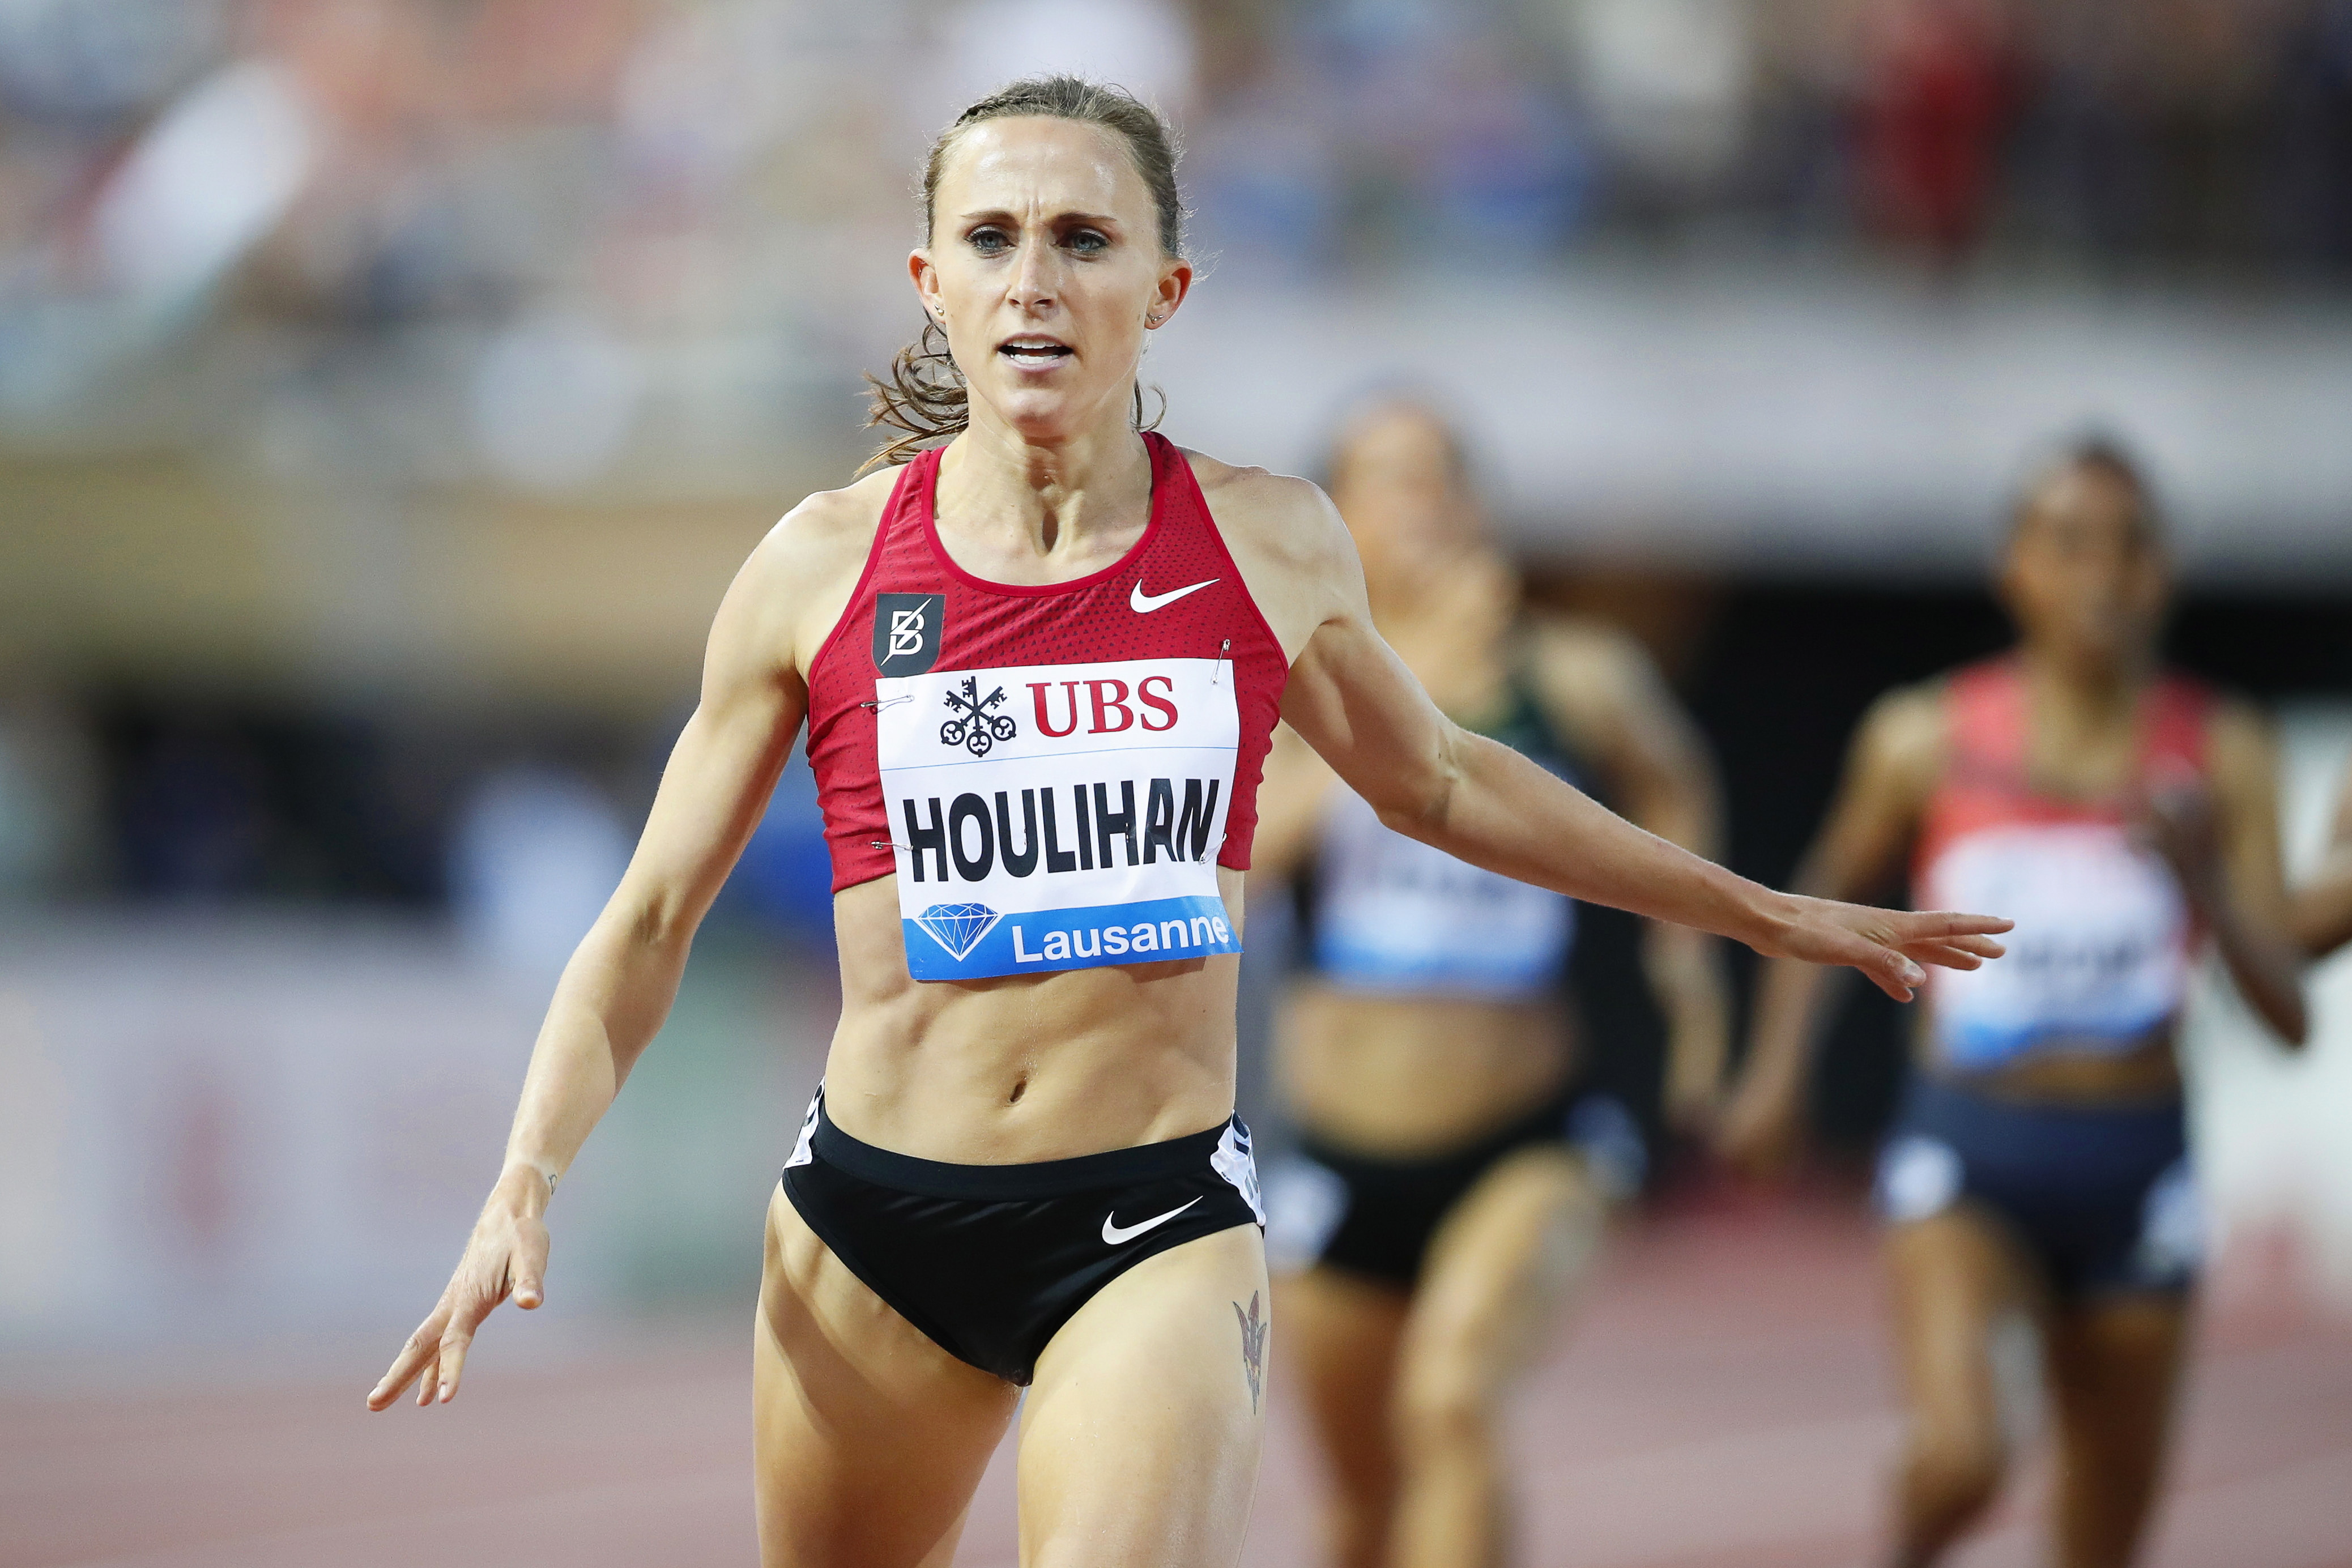 Shelby Houlihan from the United States competes in a race. EFE/VALENTIN FLAURAUD/File
